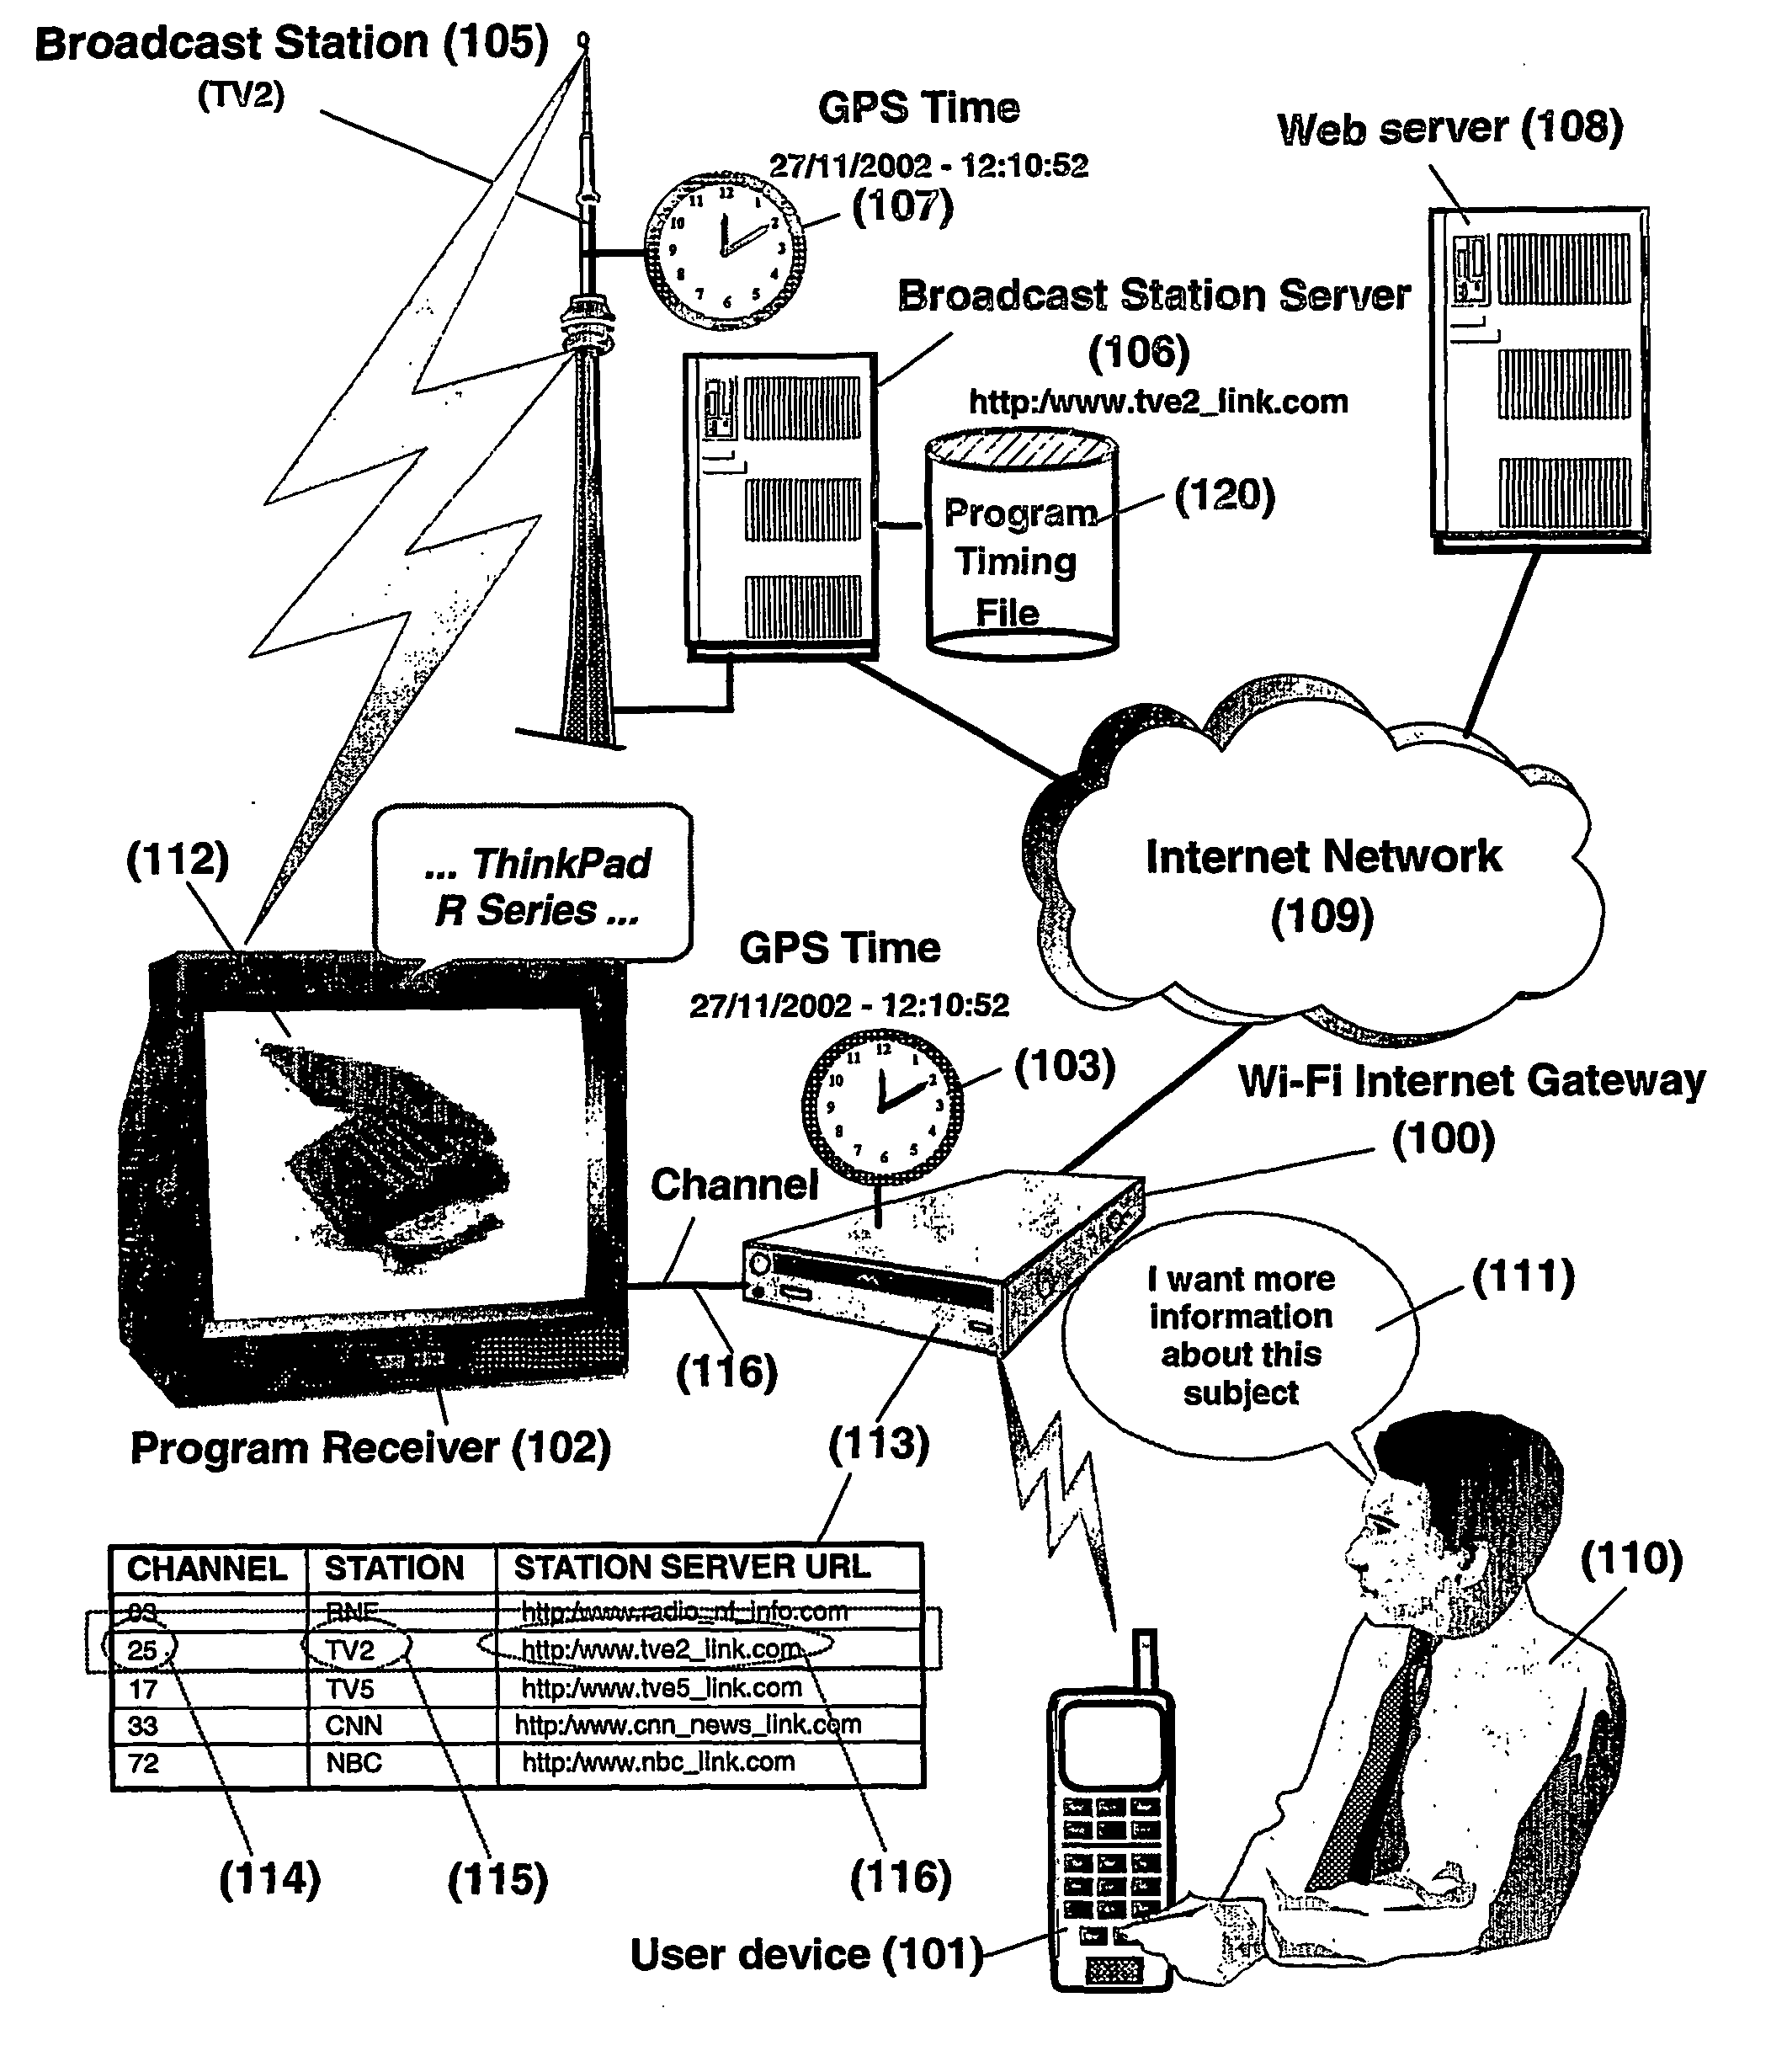 System and method for accessing through wireless internet access points information or services related to broadcast programs